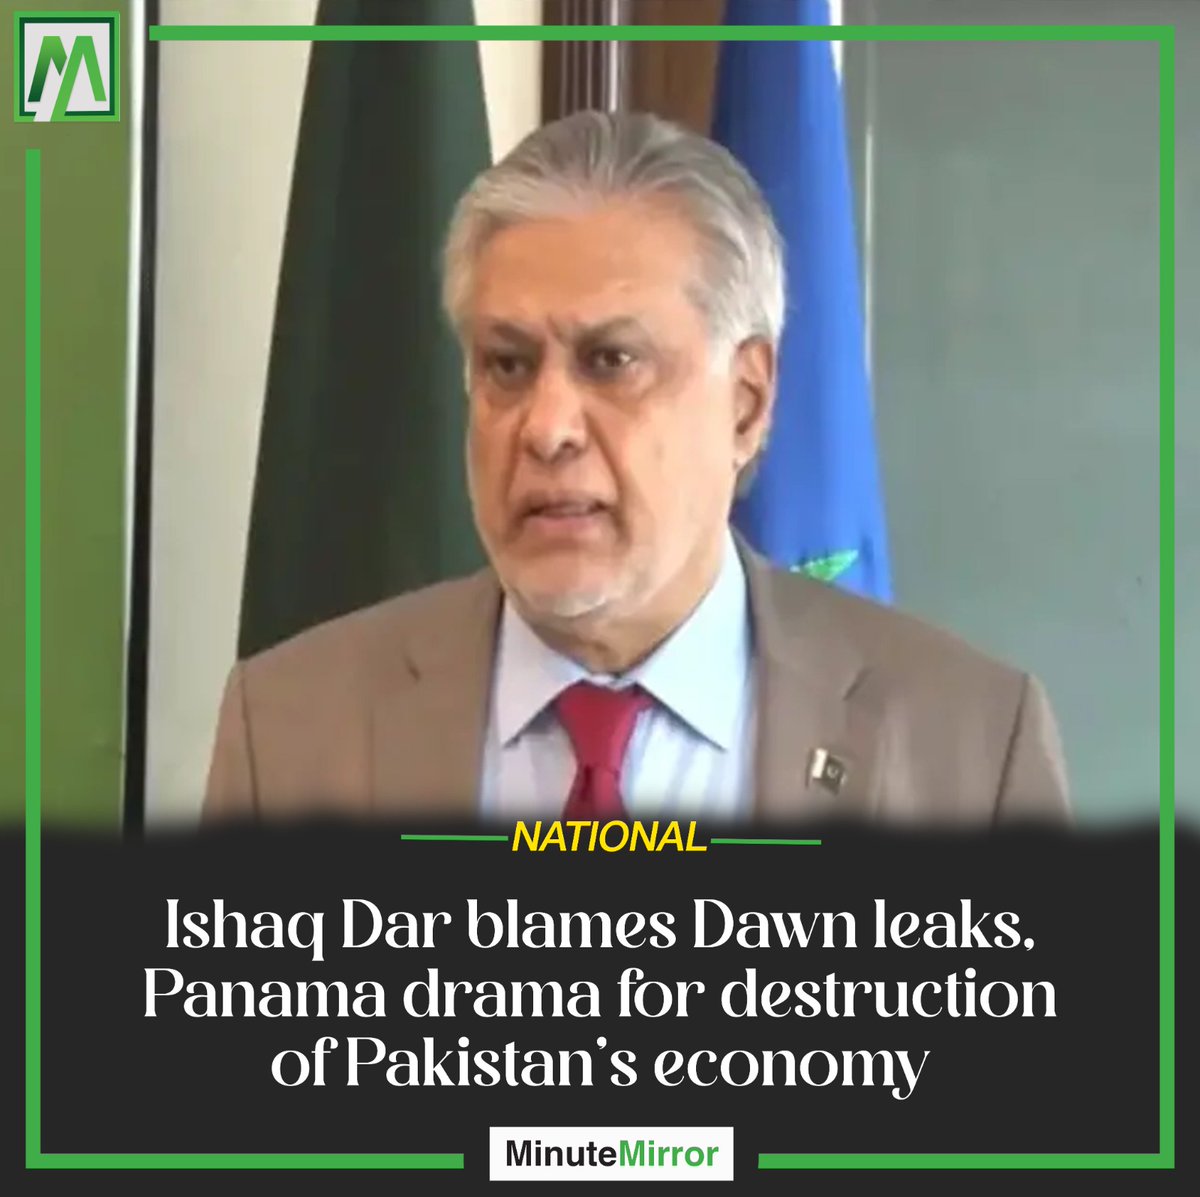 #IshaqDar expressed his views, pointing the destruction of Pakistan’s economy to the events surrounding DawnLeaks and the PanamaScandal. @MIshaqDar50 affirmed his commitment to collectively overcoming this crisis and restoring stability to the nation. 
minutemirror.com.pk/ishaq-dar-blam…